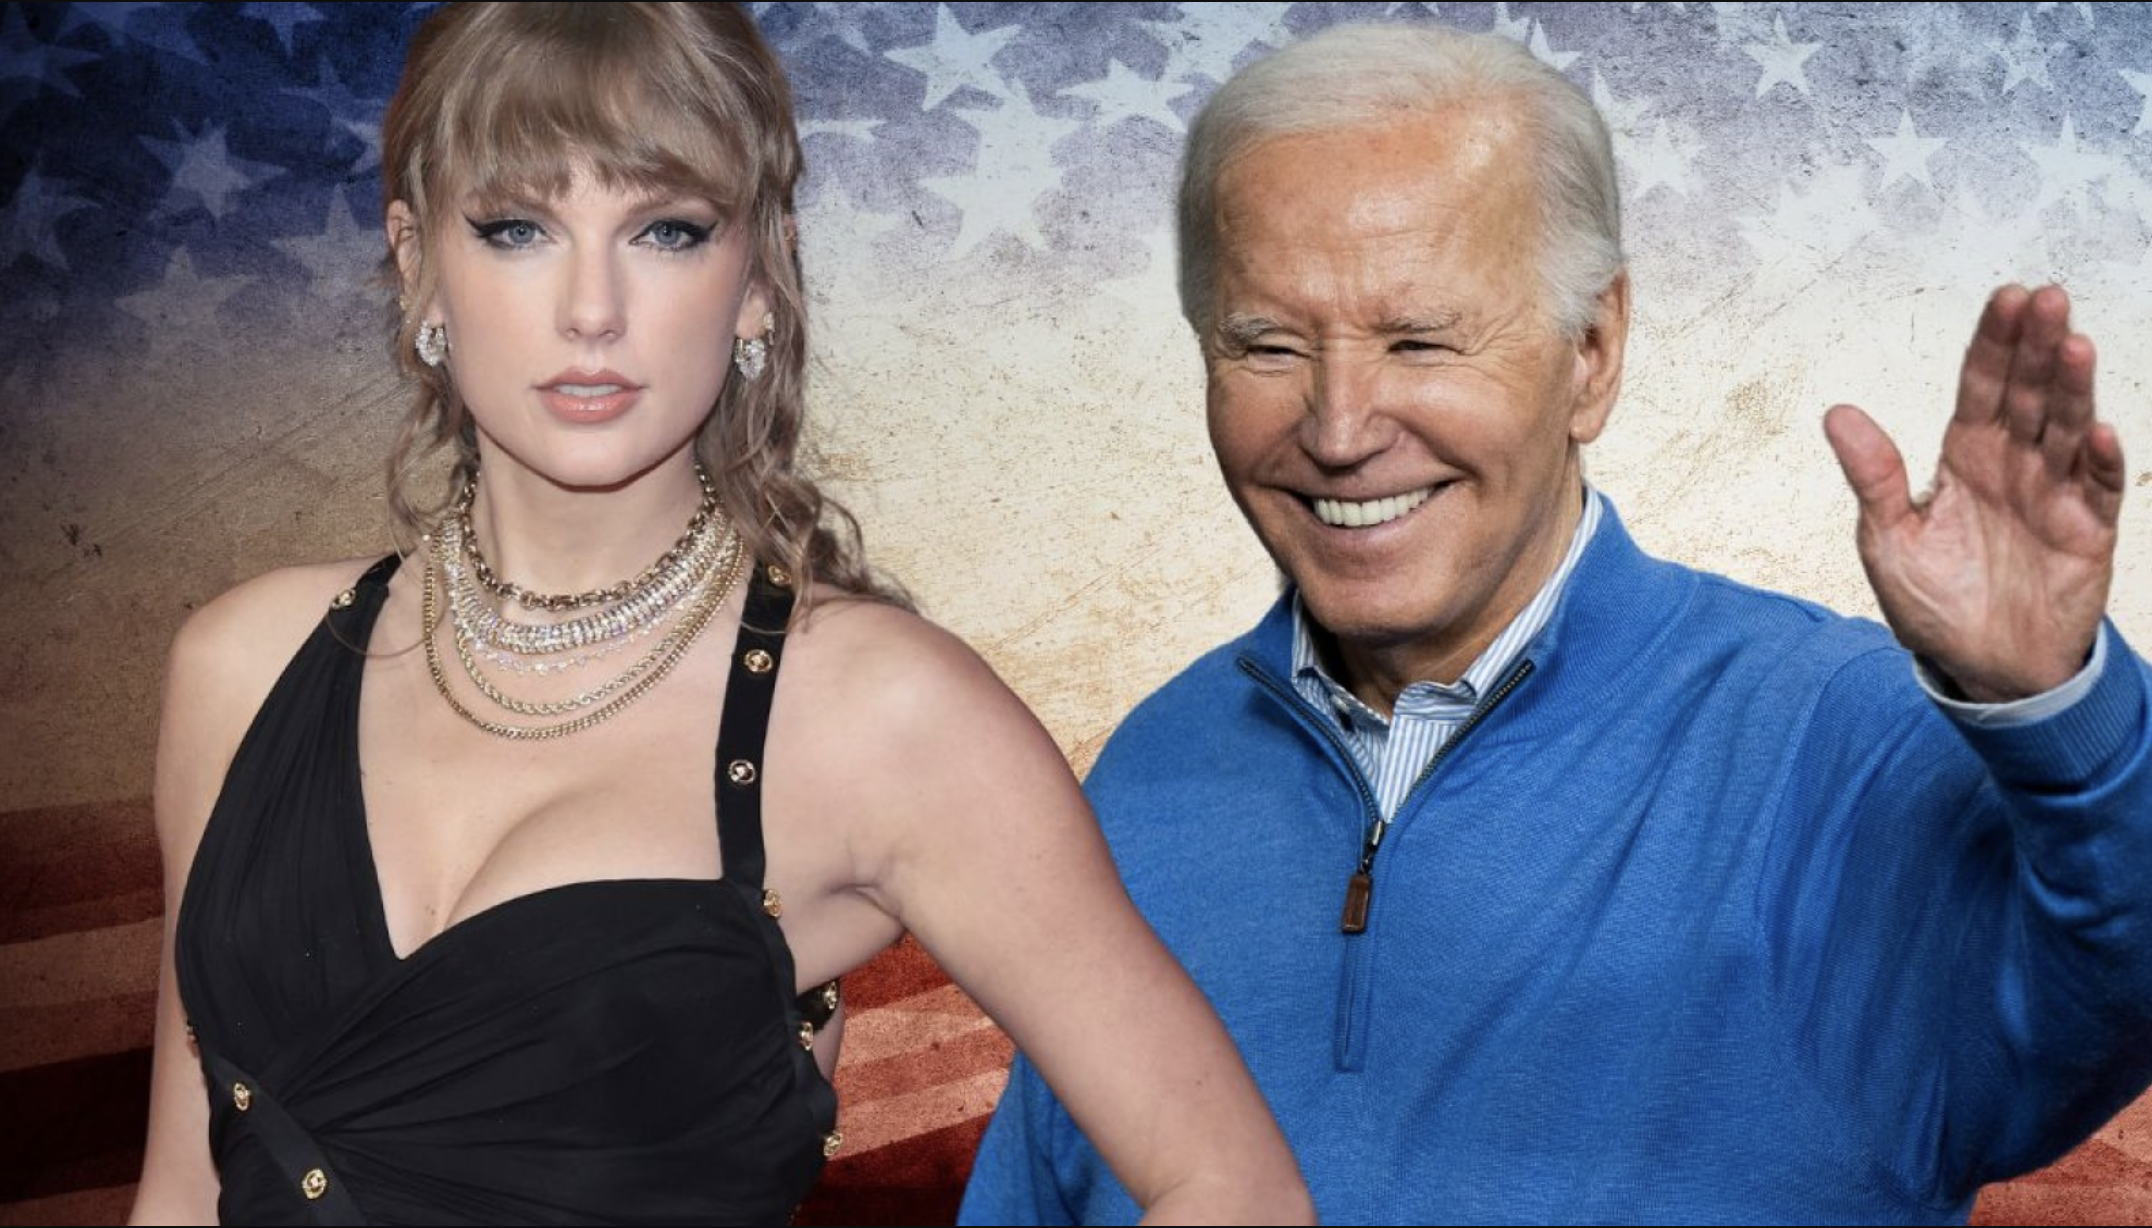 Taylor Swift Accused of Brainwashing Americans for Biden Votes by Conspiracy Theorist Conservatives – Megyn Kelly Anticipates Swift’s Downfall from Stardom.